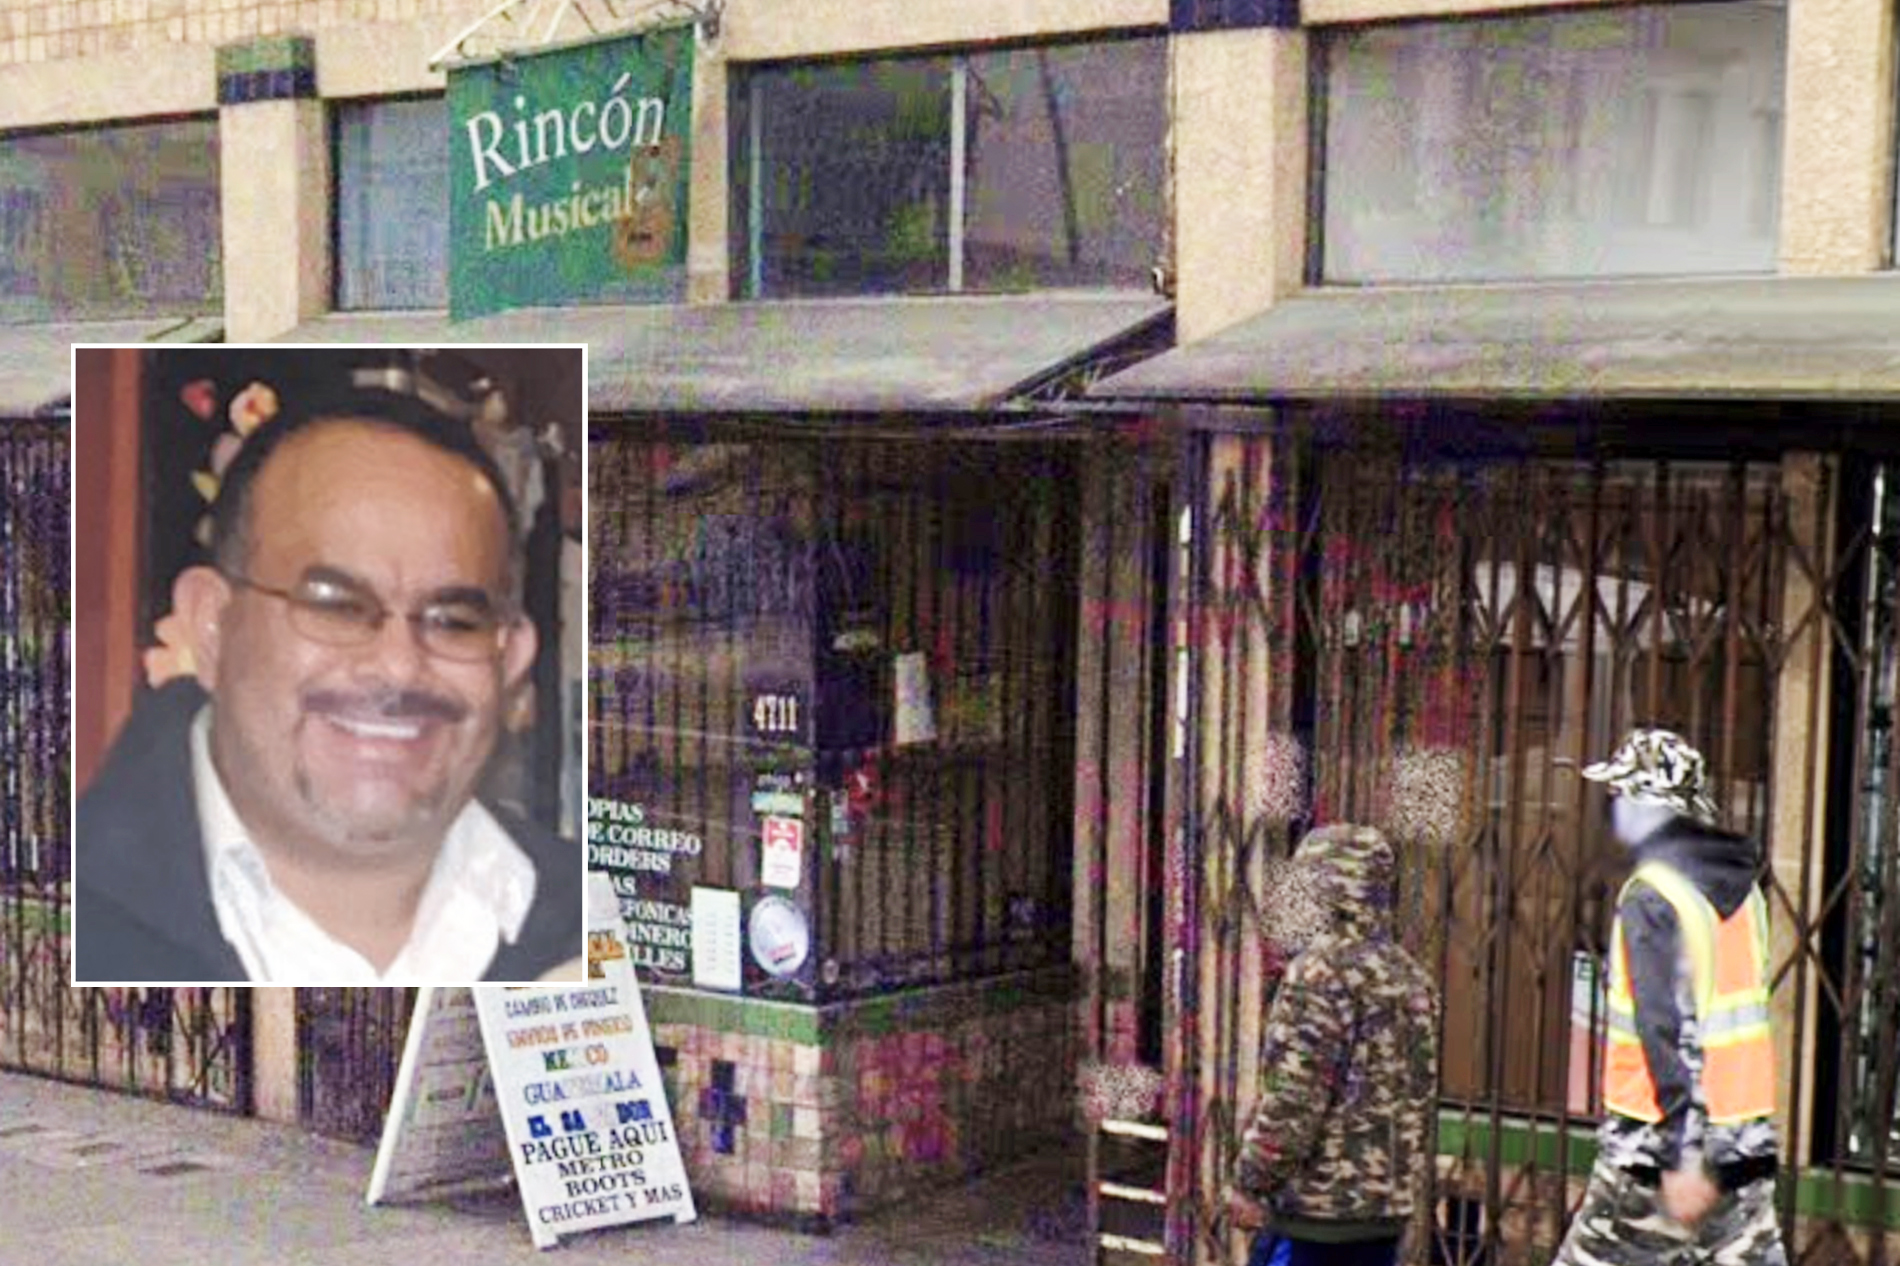 A composite image of a storefront and man.